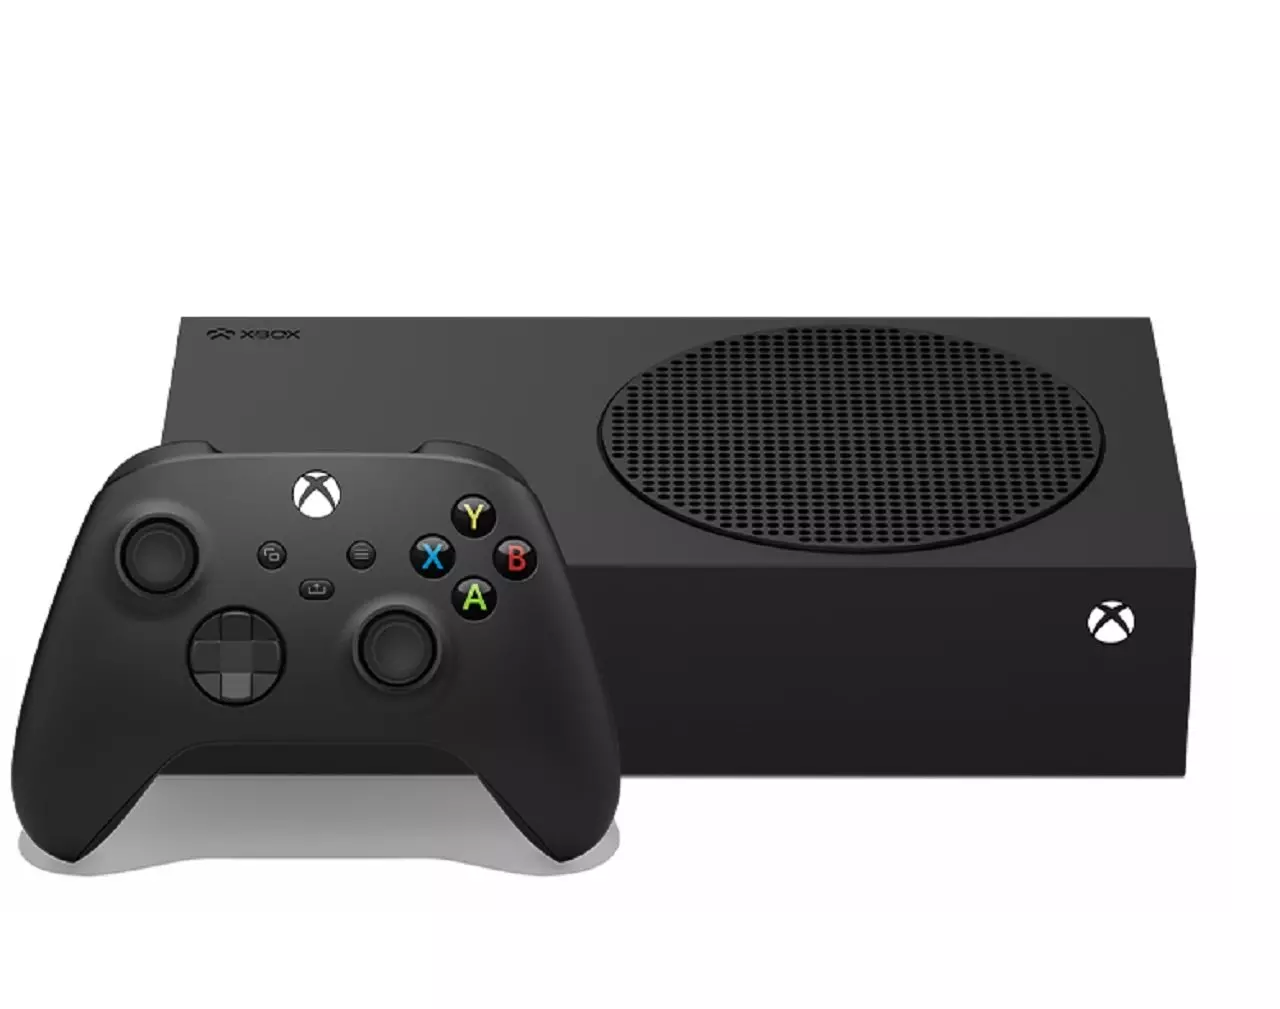 1TB Xbox Series S Carbon Black pre-order: here's where to buy